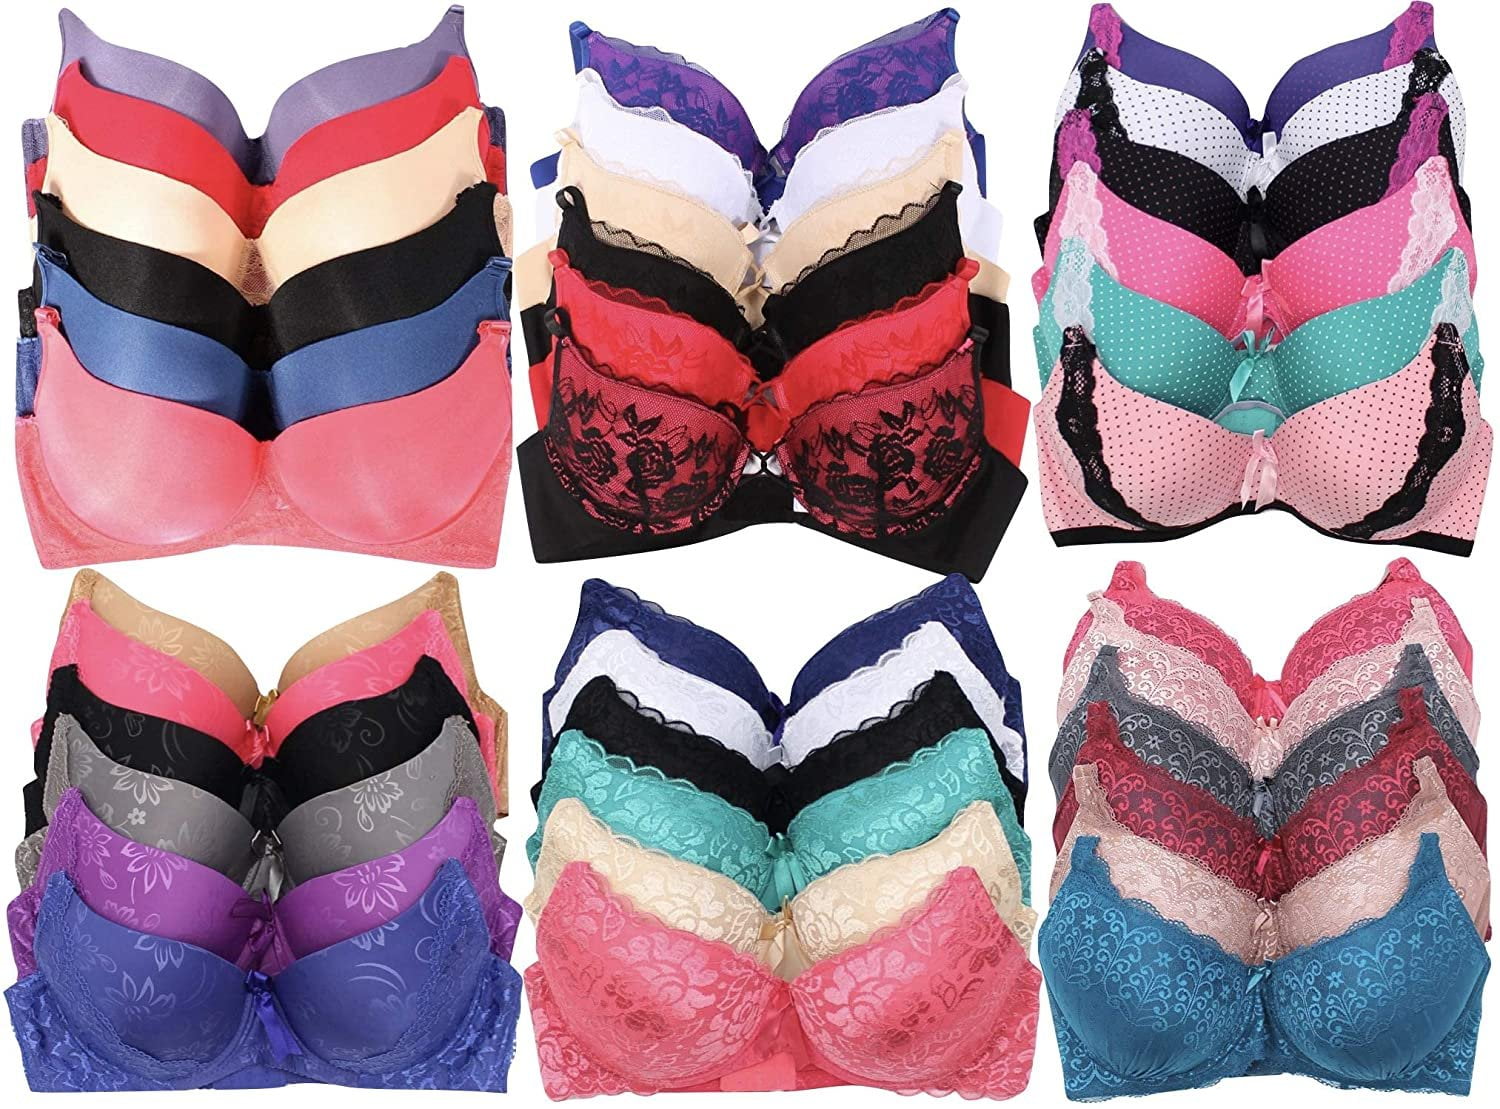 Women Bras 6 Pack of Bra D cup DD cup DDD cup Size 42D (F8203